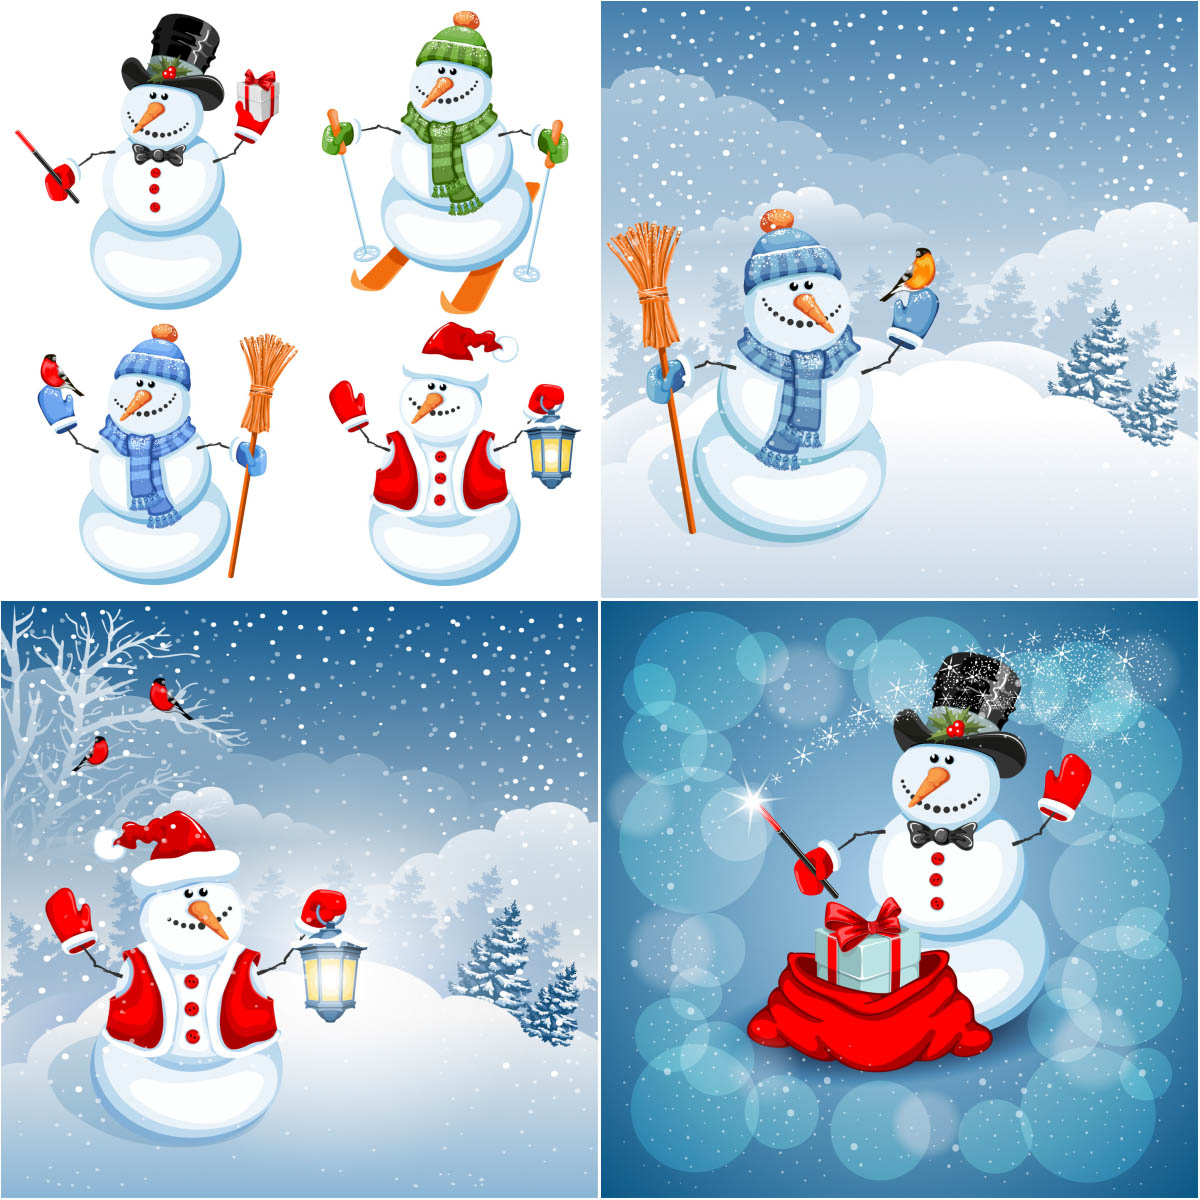 Backgrounds with snowman